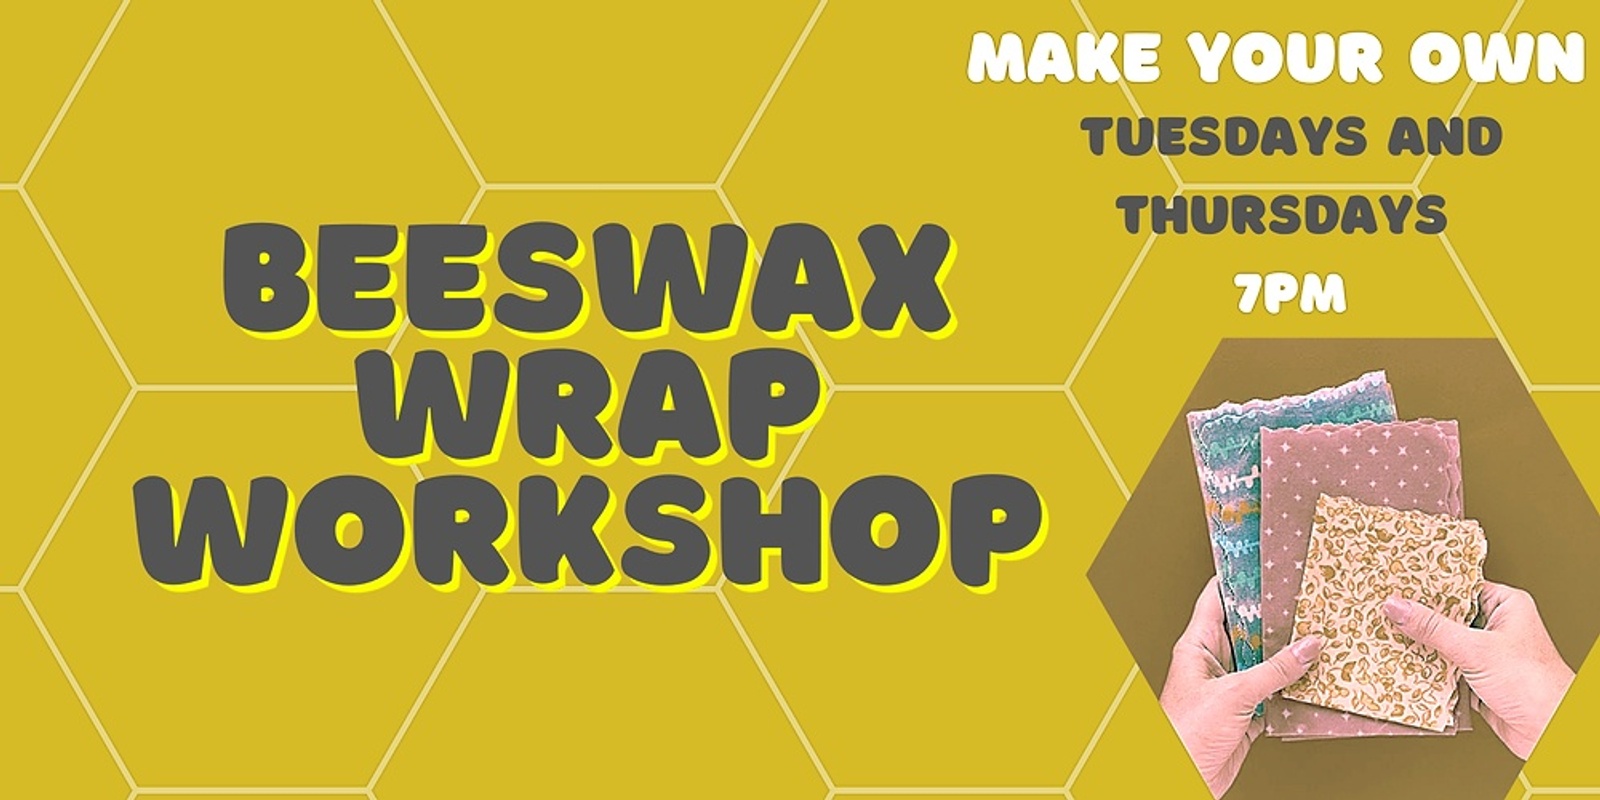 Banner image for Beeswax wrap workshop